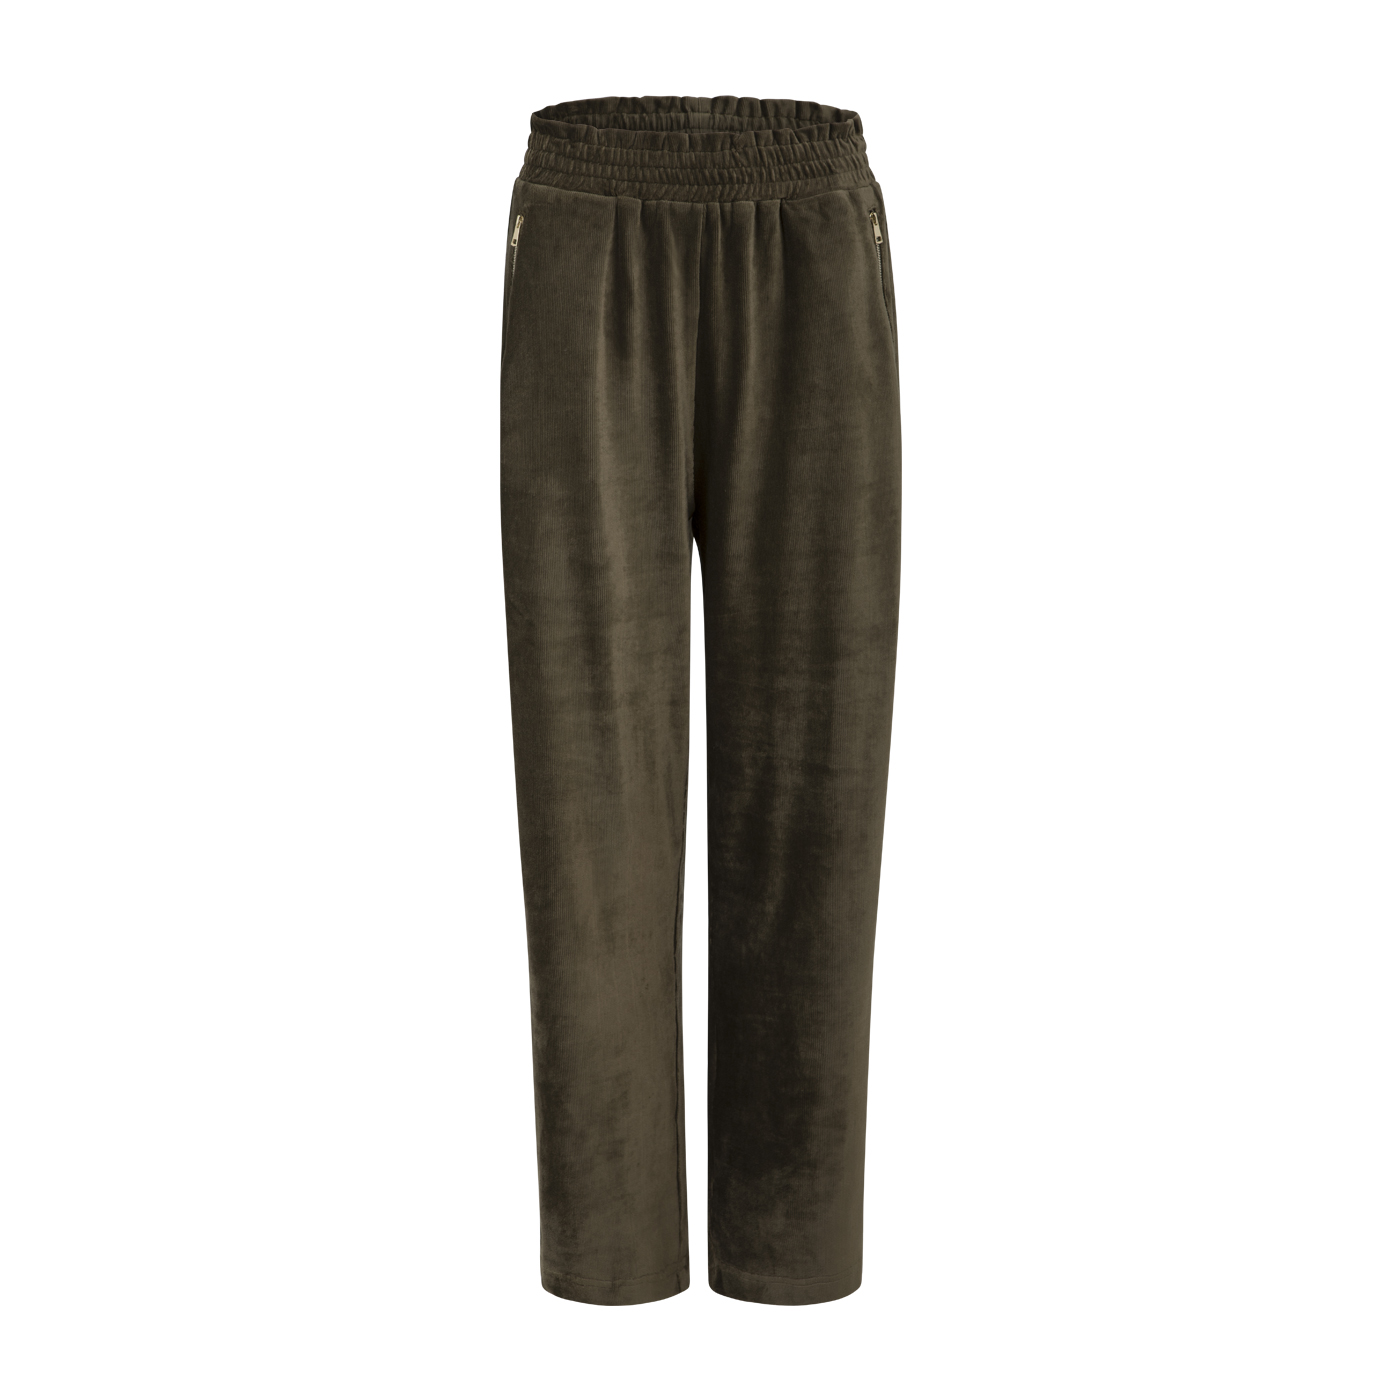 Relaxed Pants in Soft Curduroy